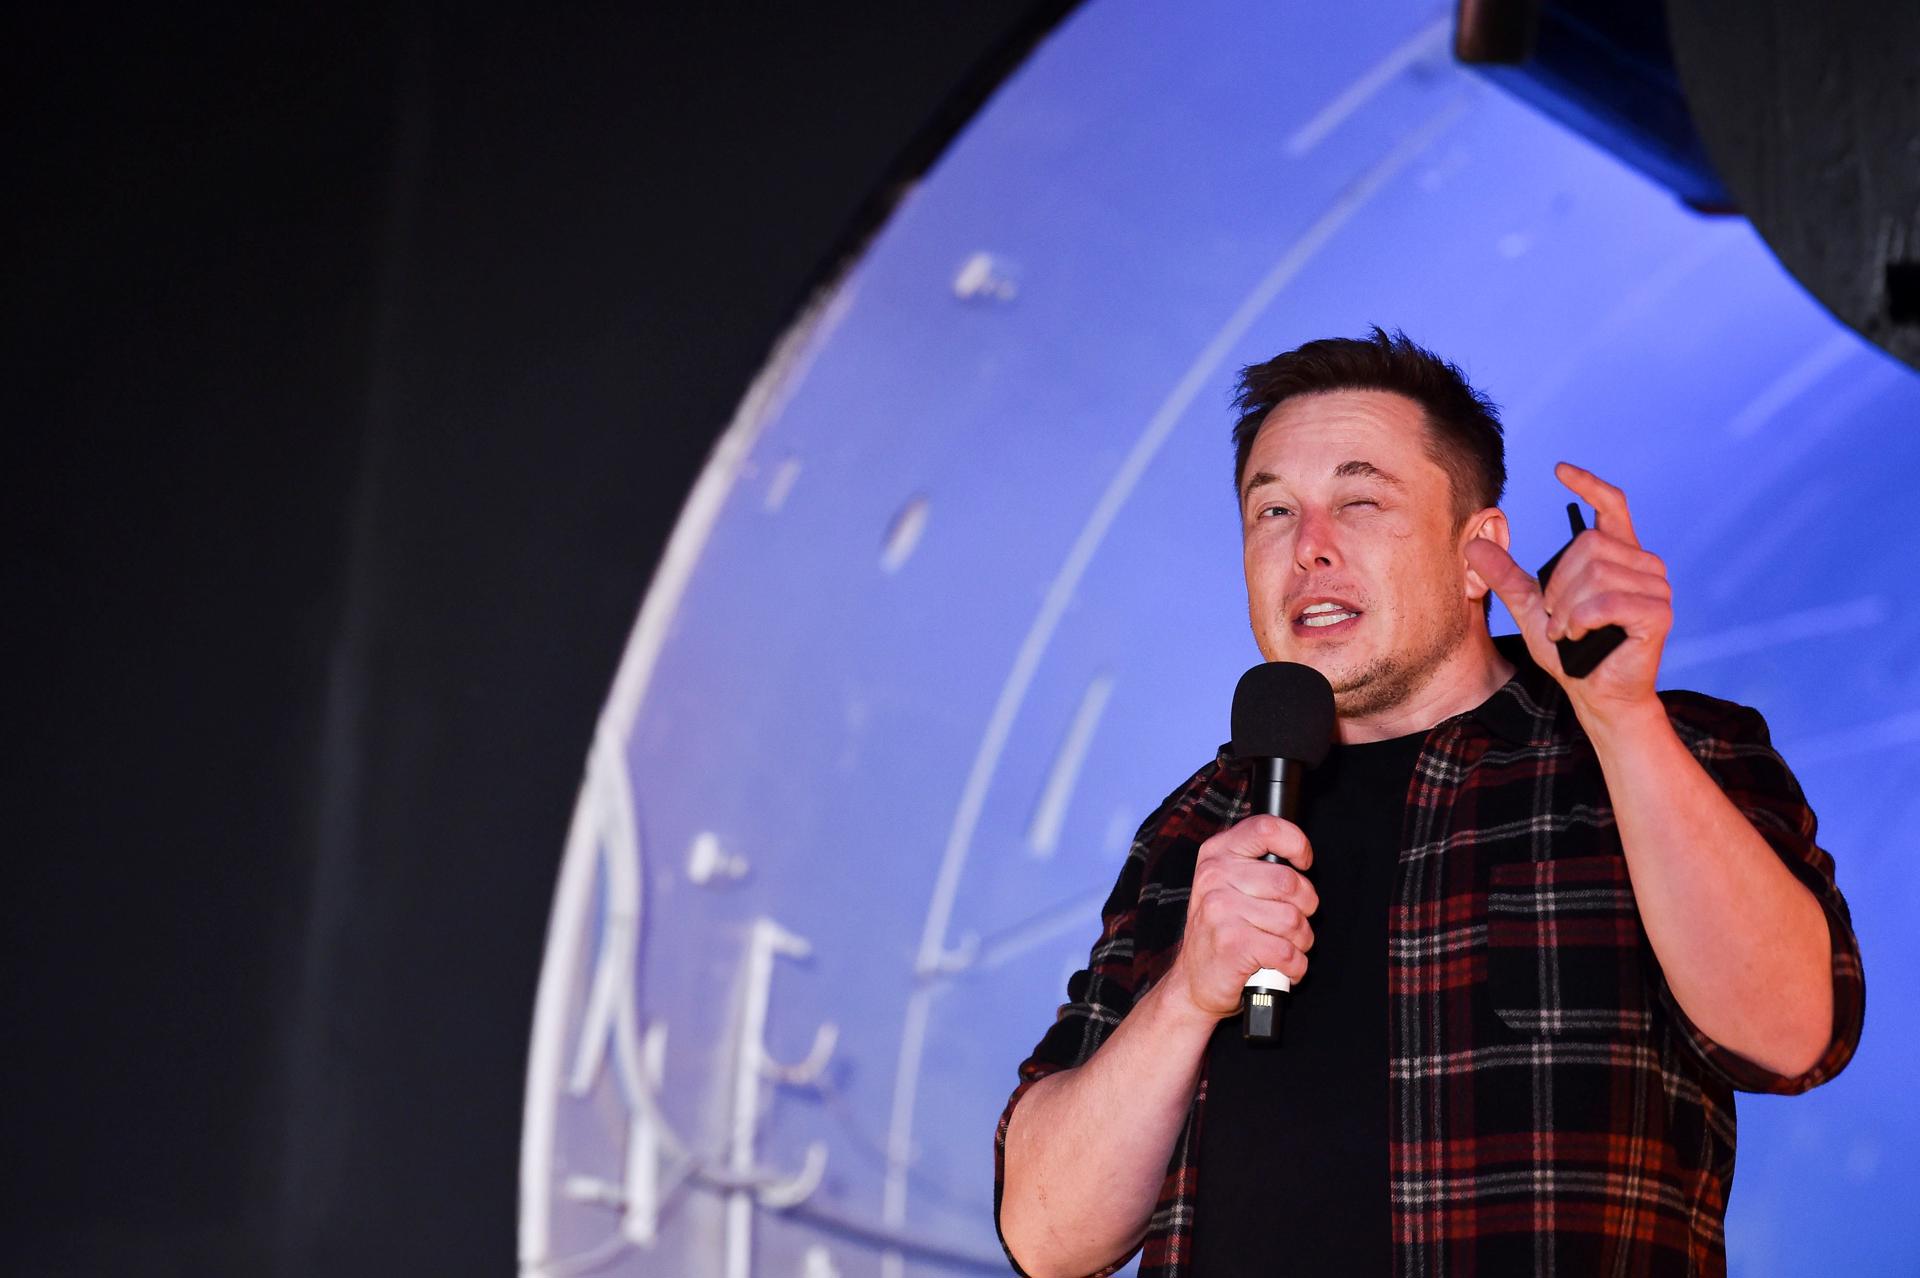 Elon Musk, co-founder and chief executive officer of Tesla Inc., speaks during an unveiling event for the Boring Company Hawthorne tunnel in Hawthorne, California, USA, 18 December 2018. EPA/ROBYN BECK / POOL/FILE
